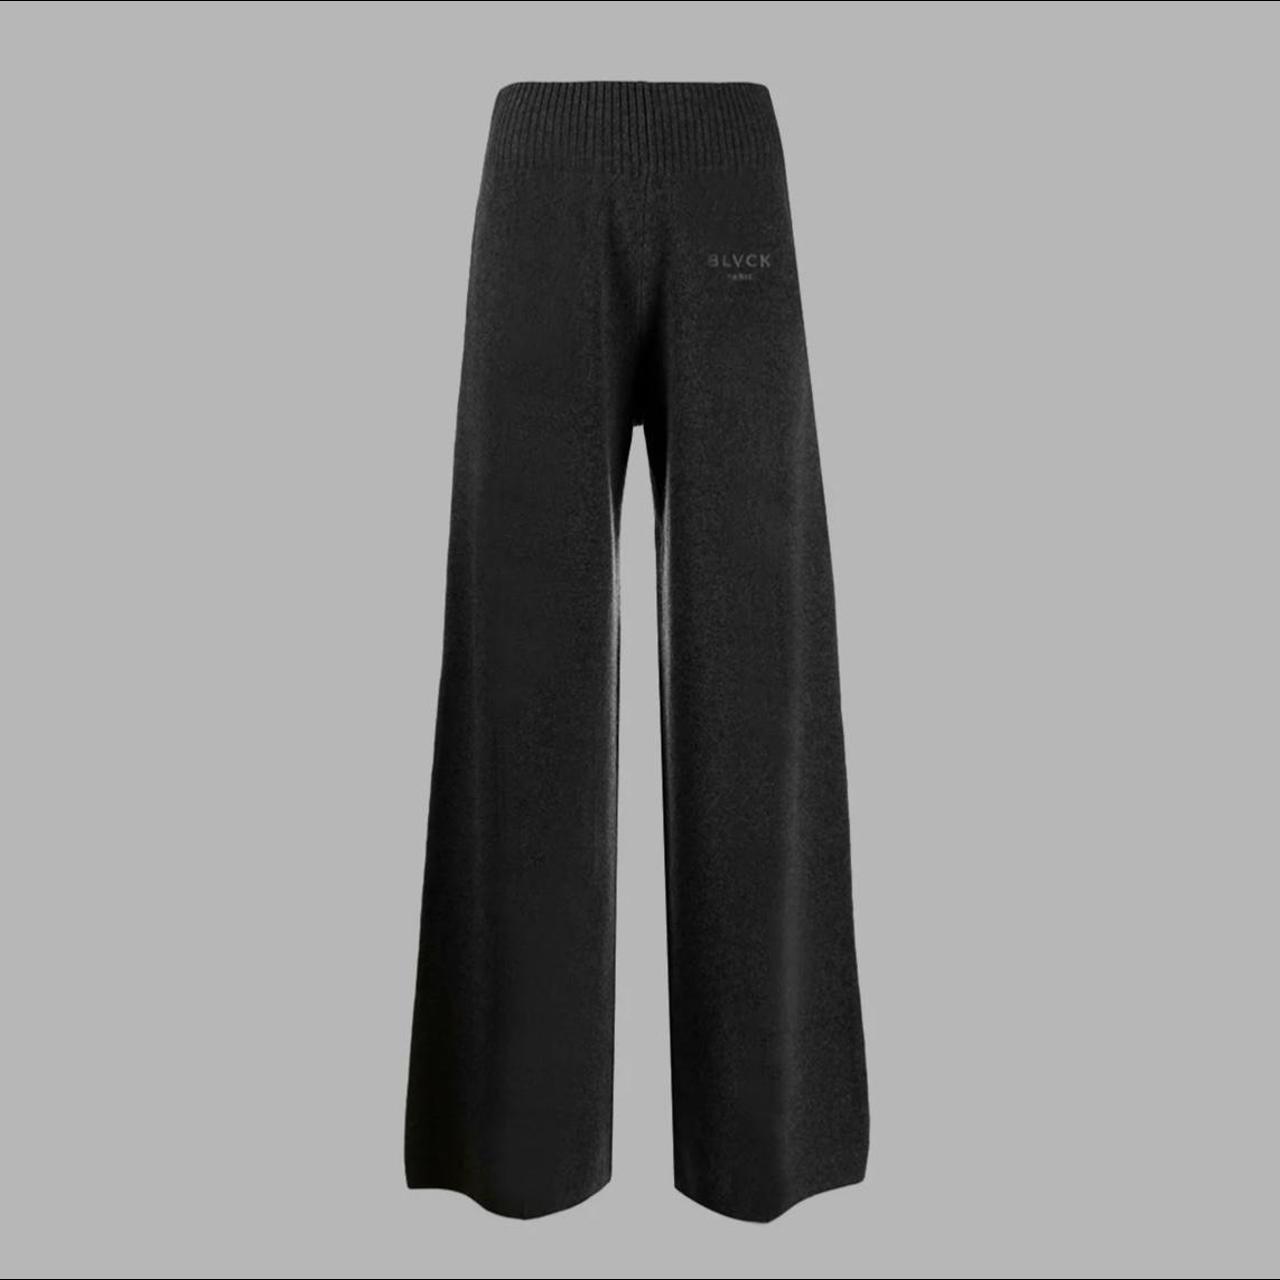 Product Image 4 - Blvck High Waisted Wide Pants
Originally